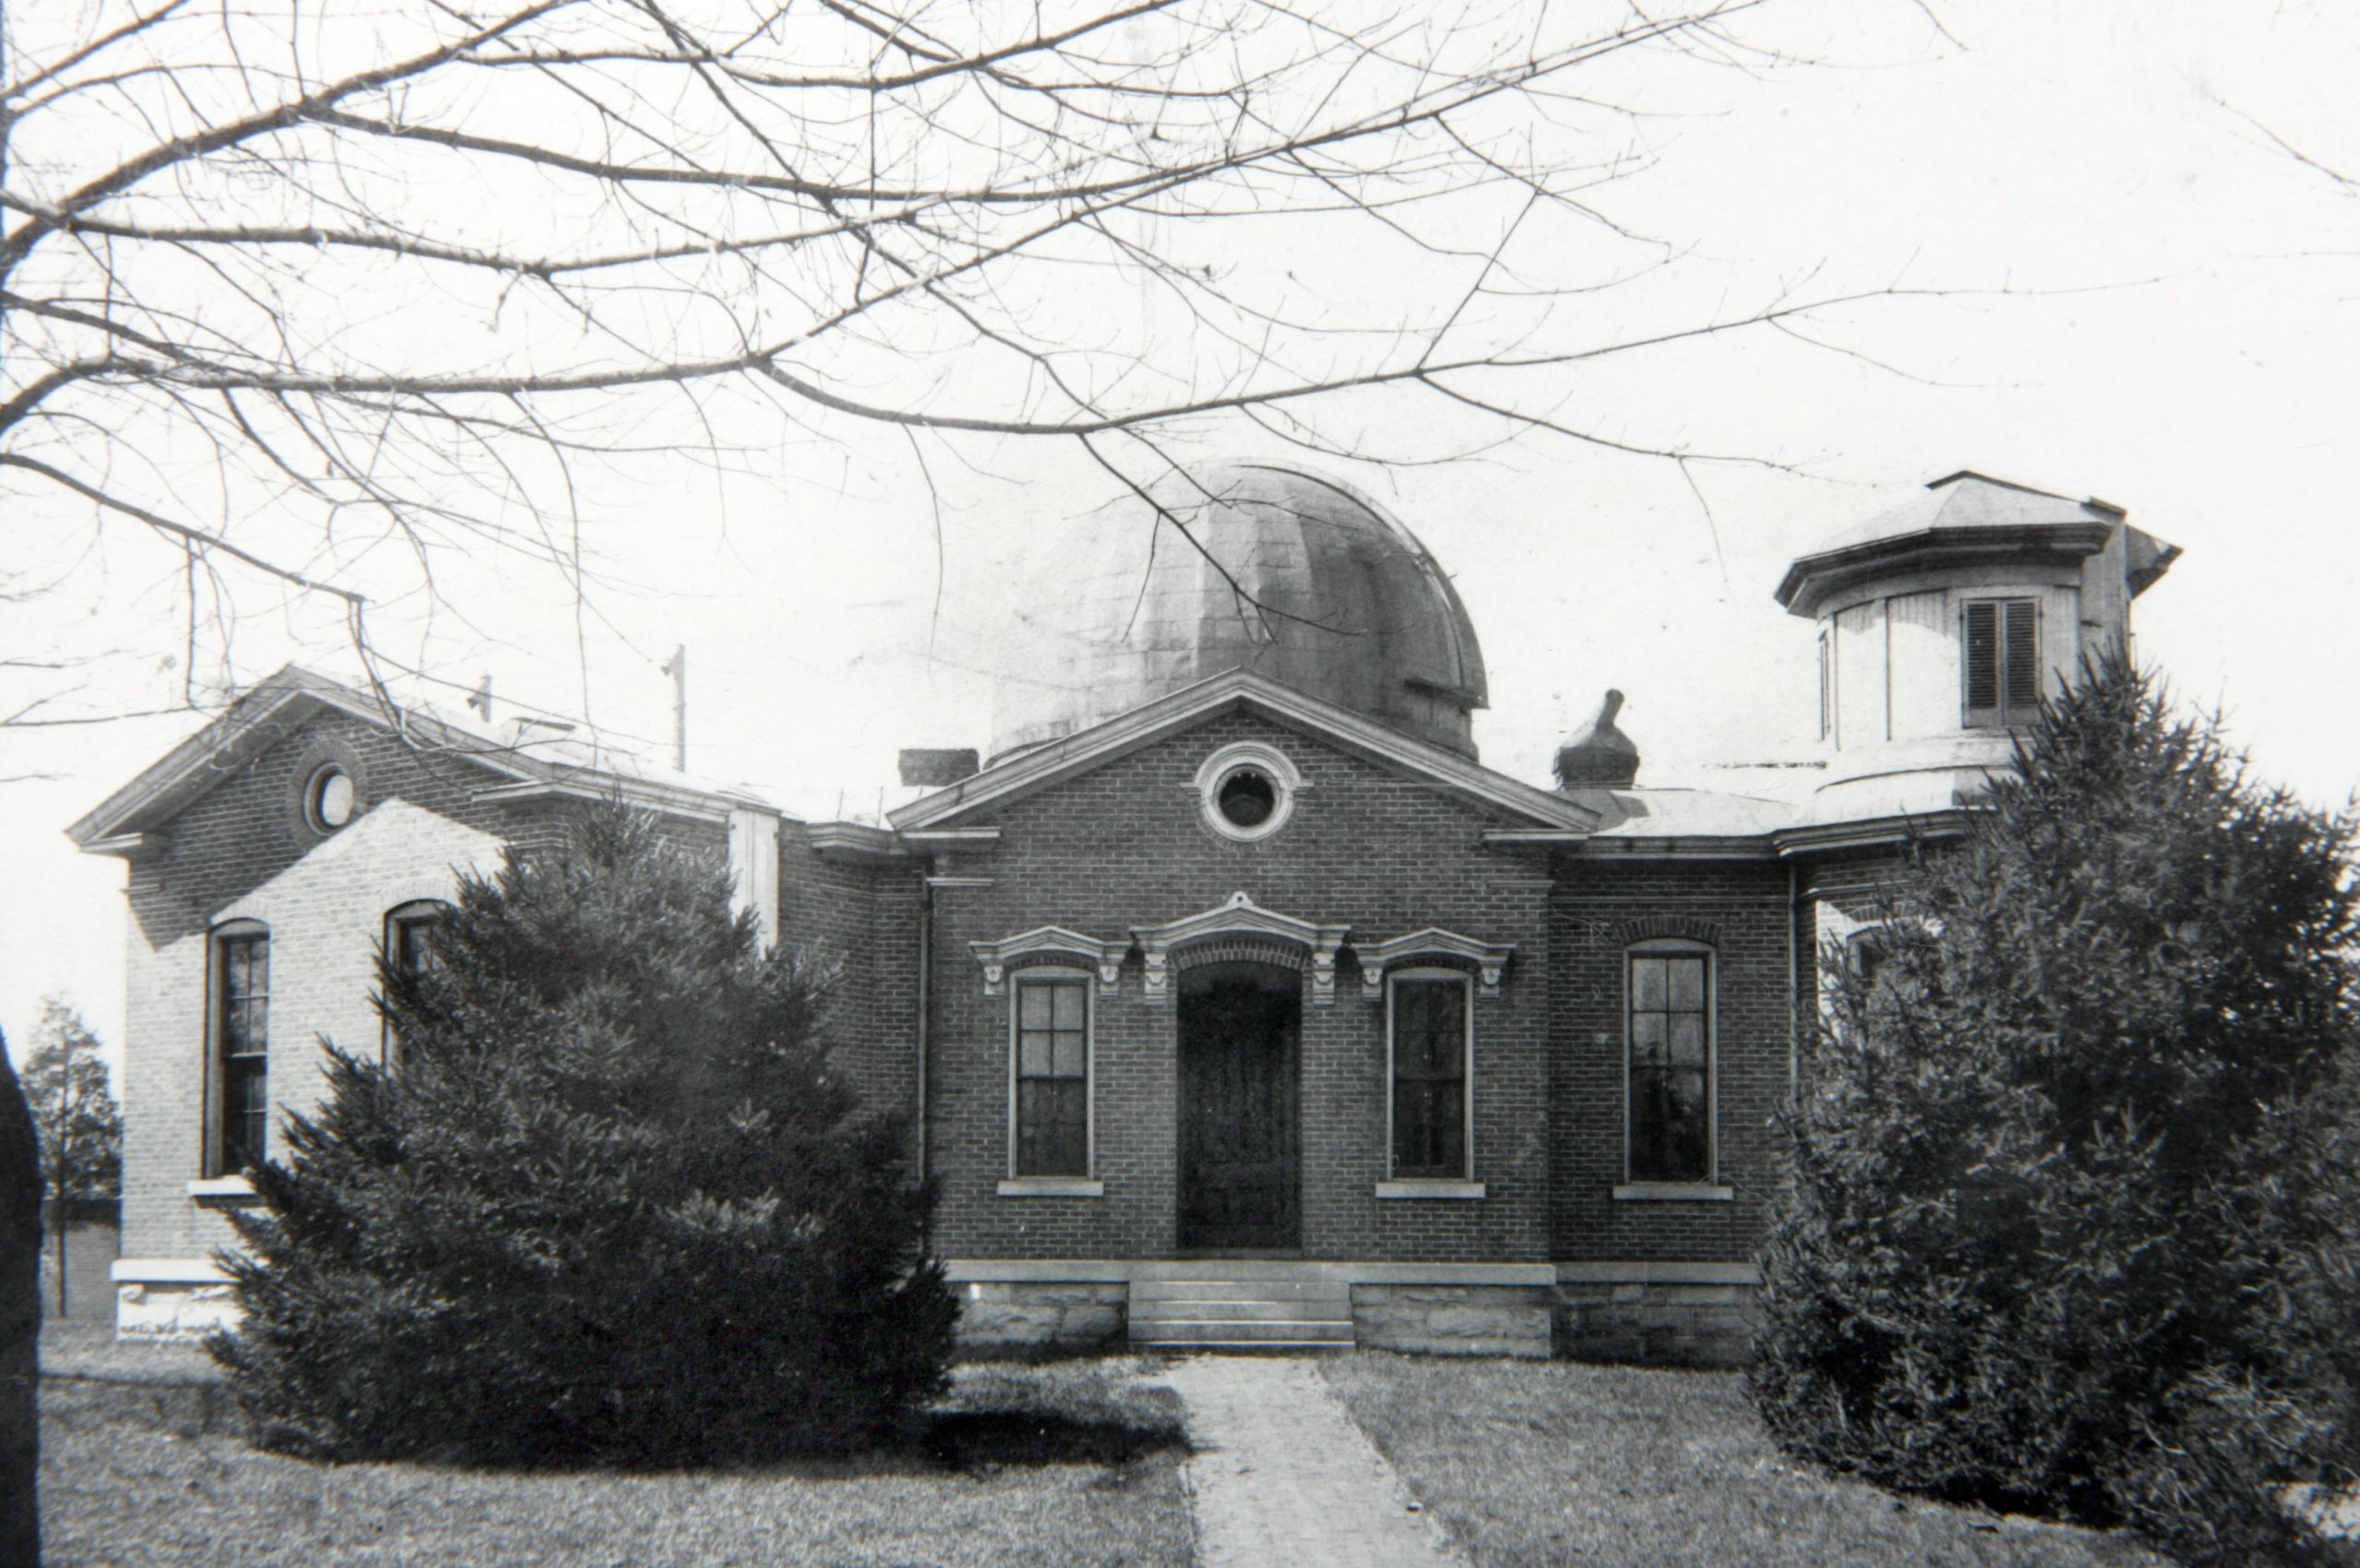 The original Astronomical Observatory